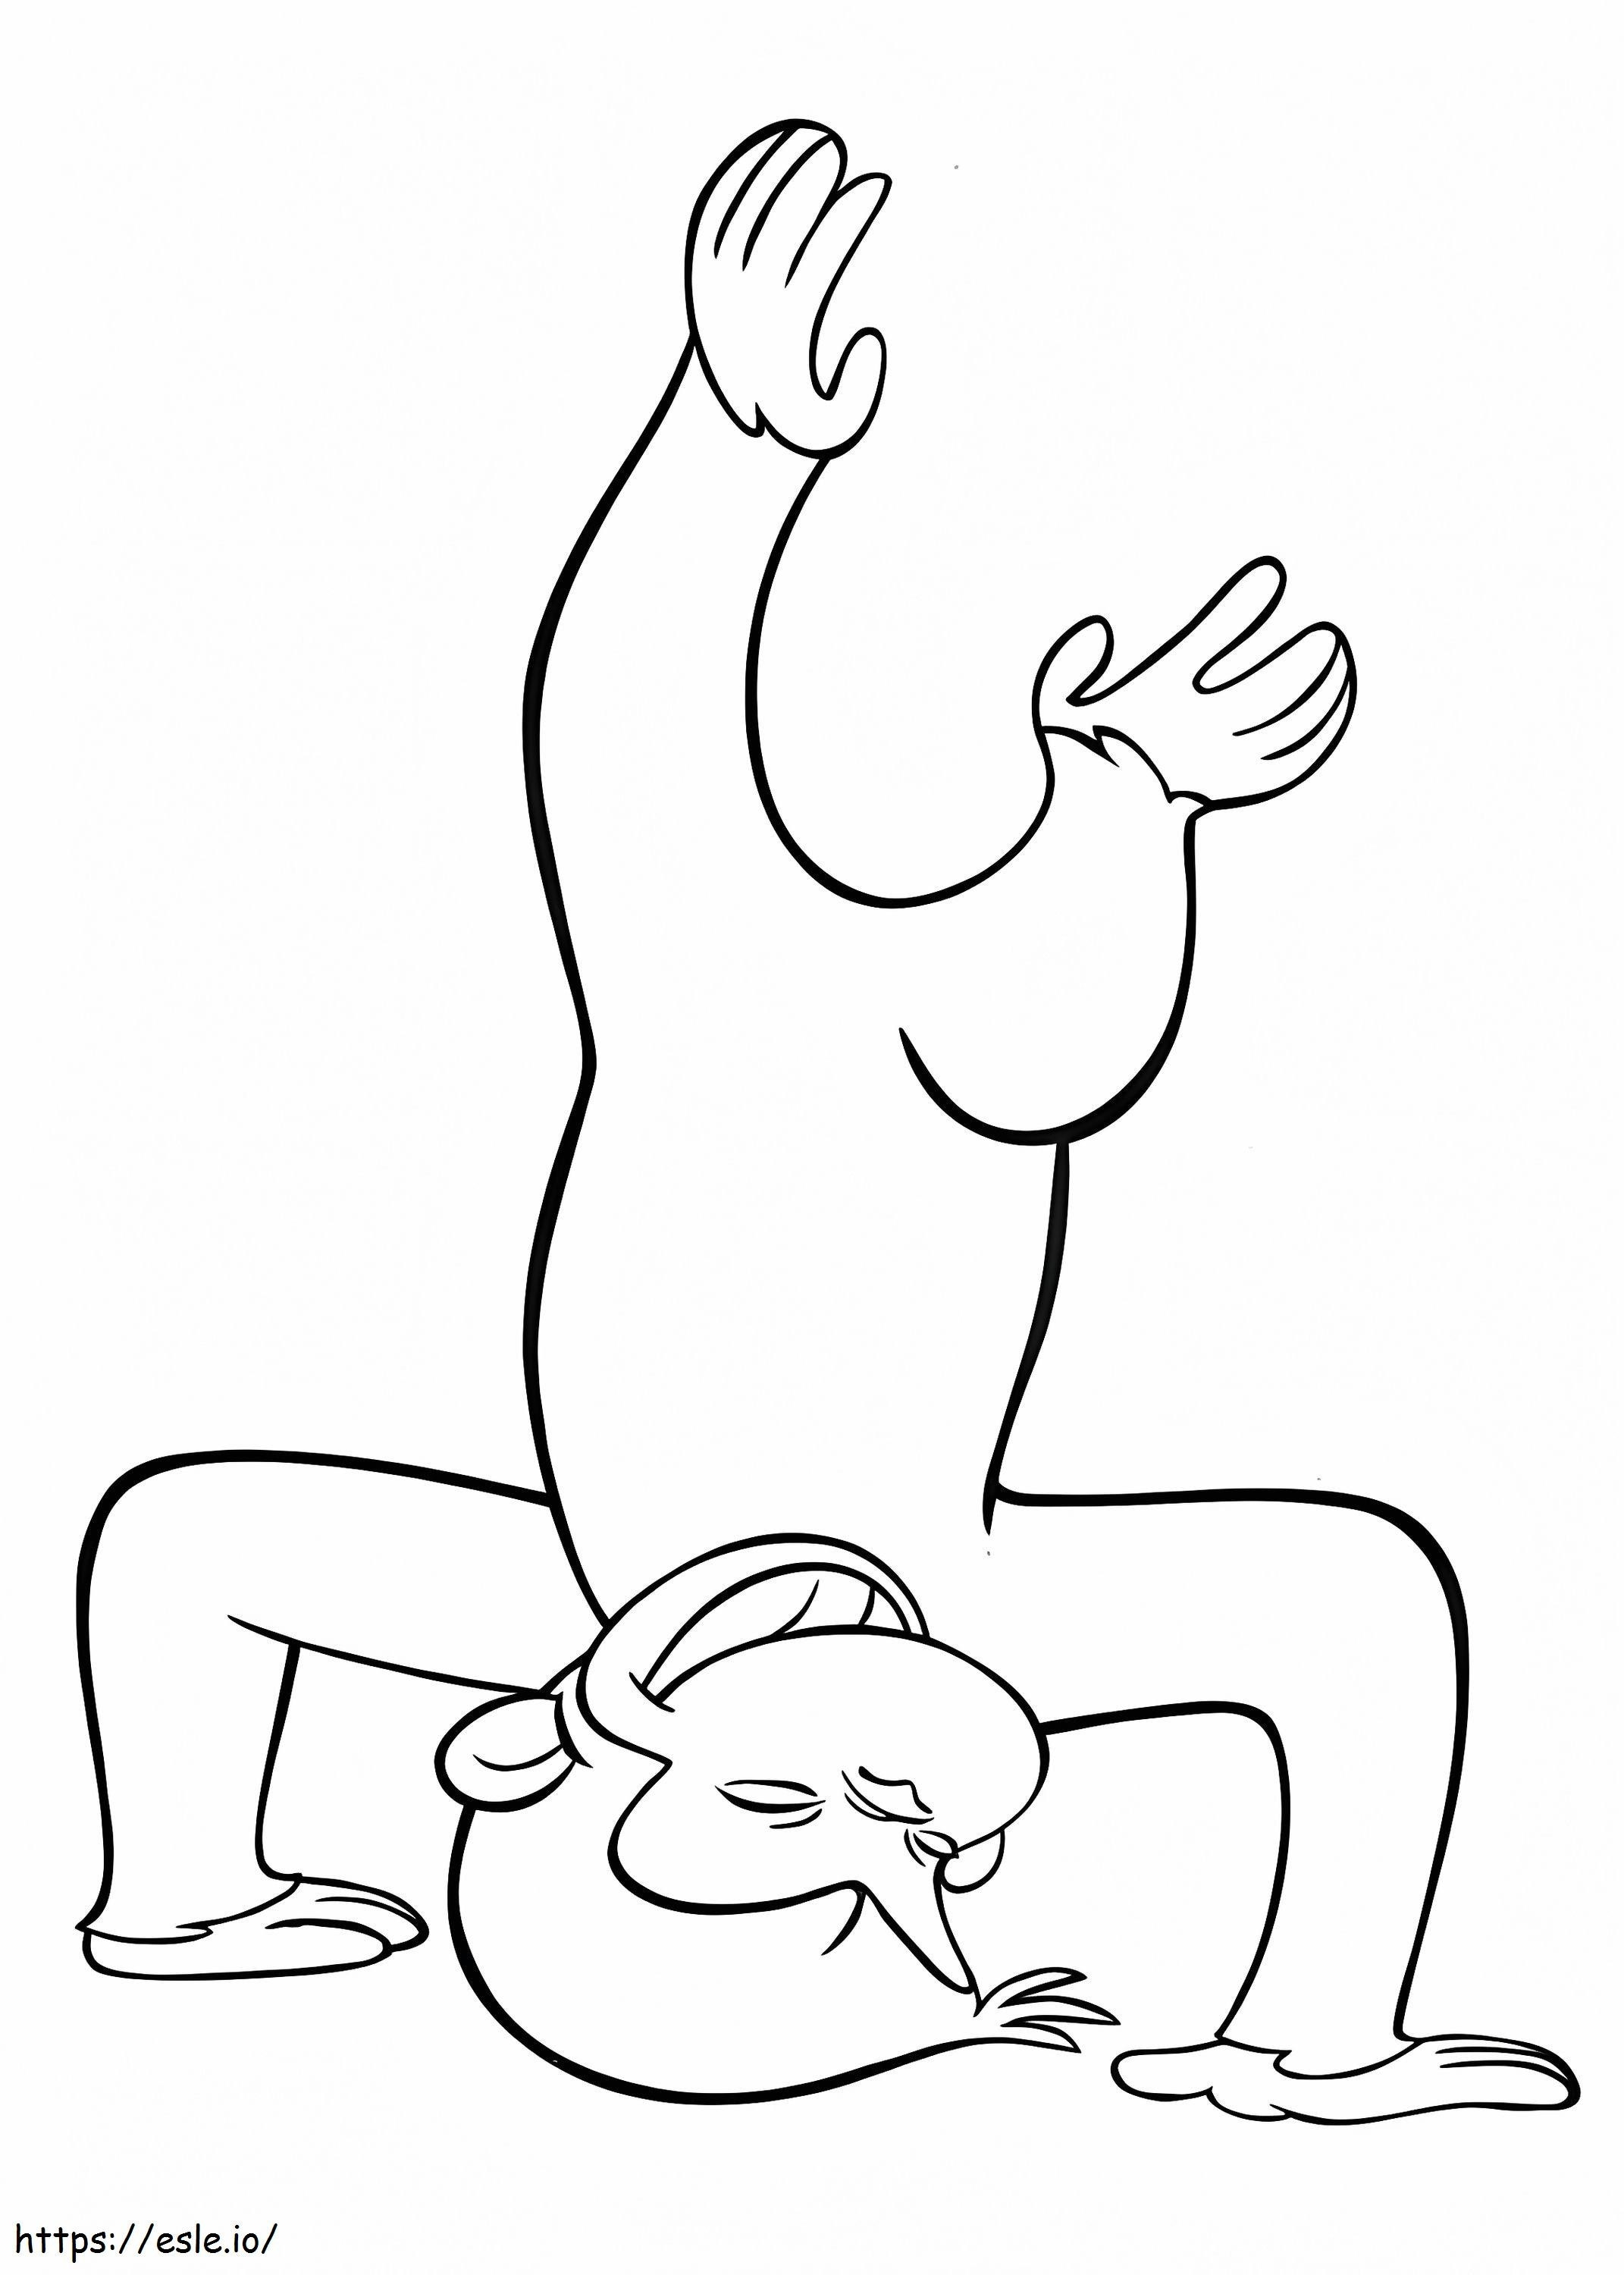 1534820478 George Handstand Pushup A4 coloring page